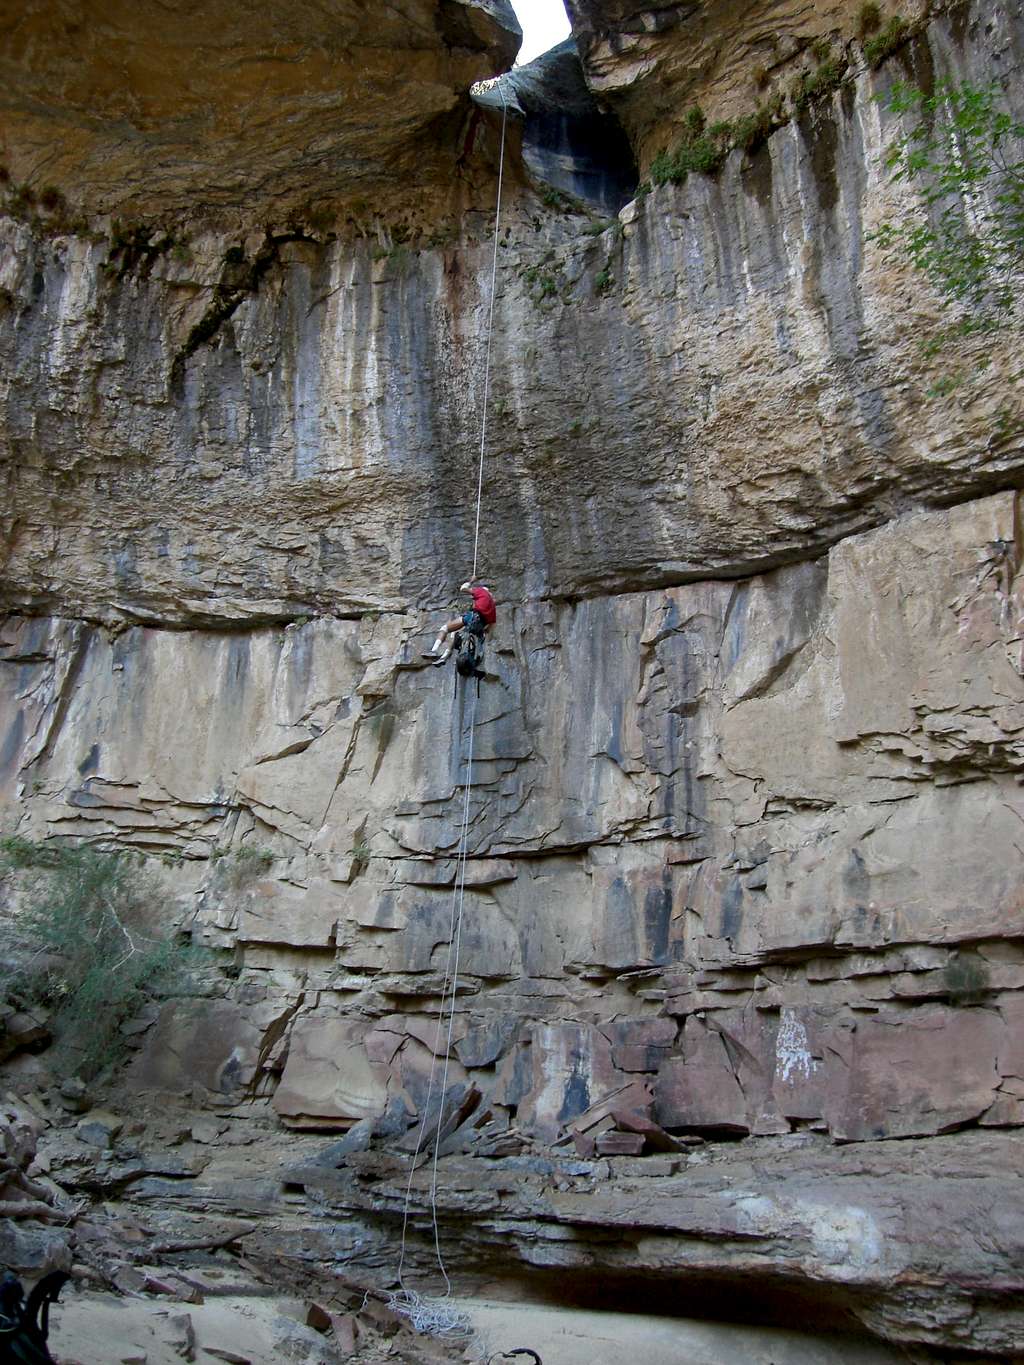 Rapping down Outlaw Arch Canyon